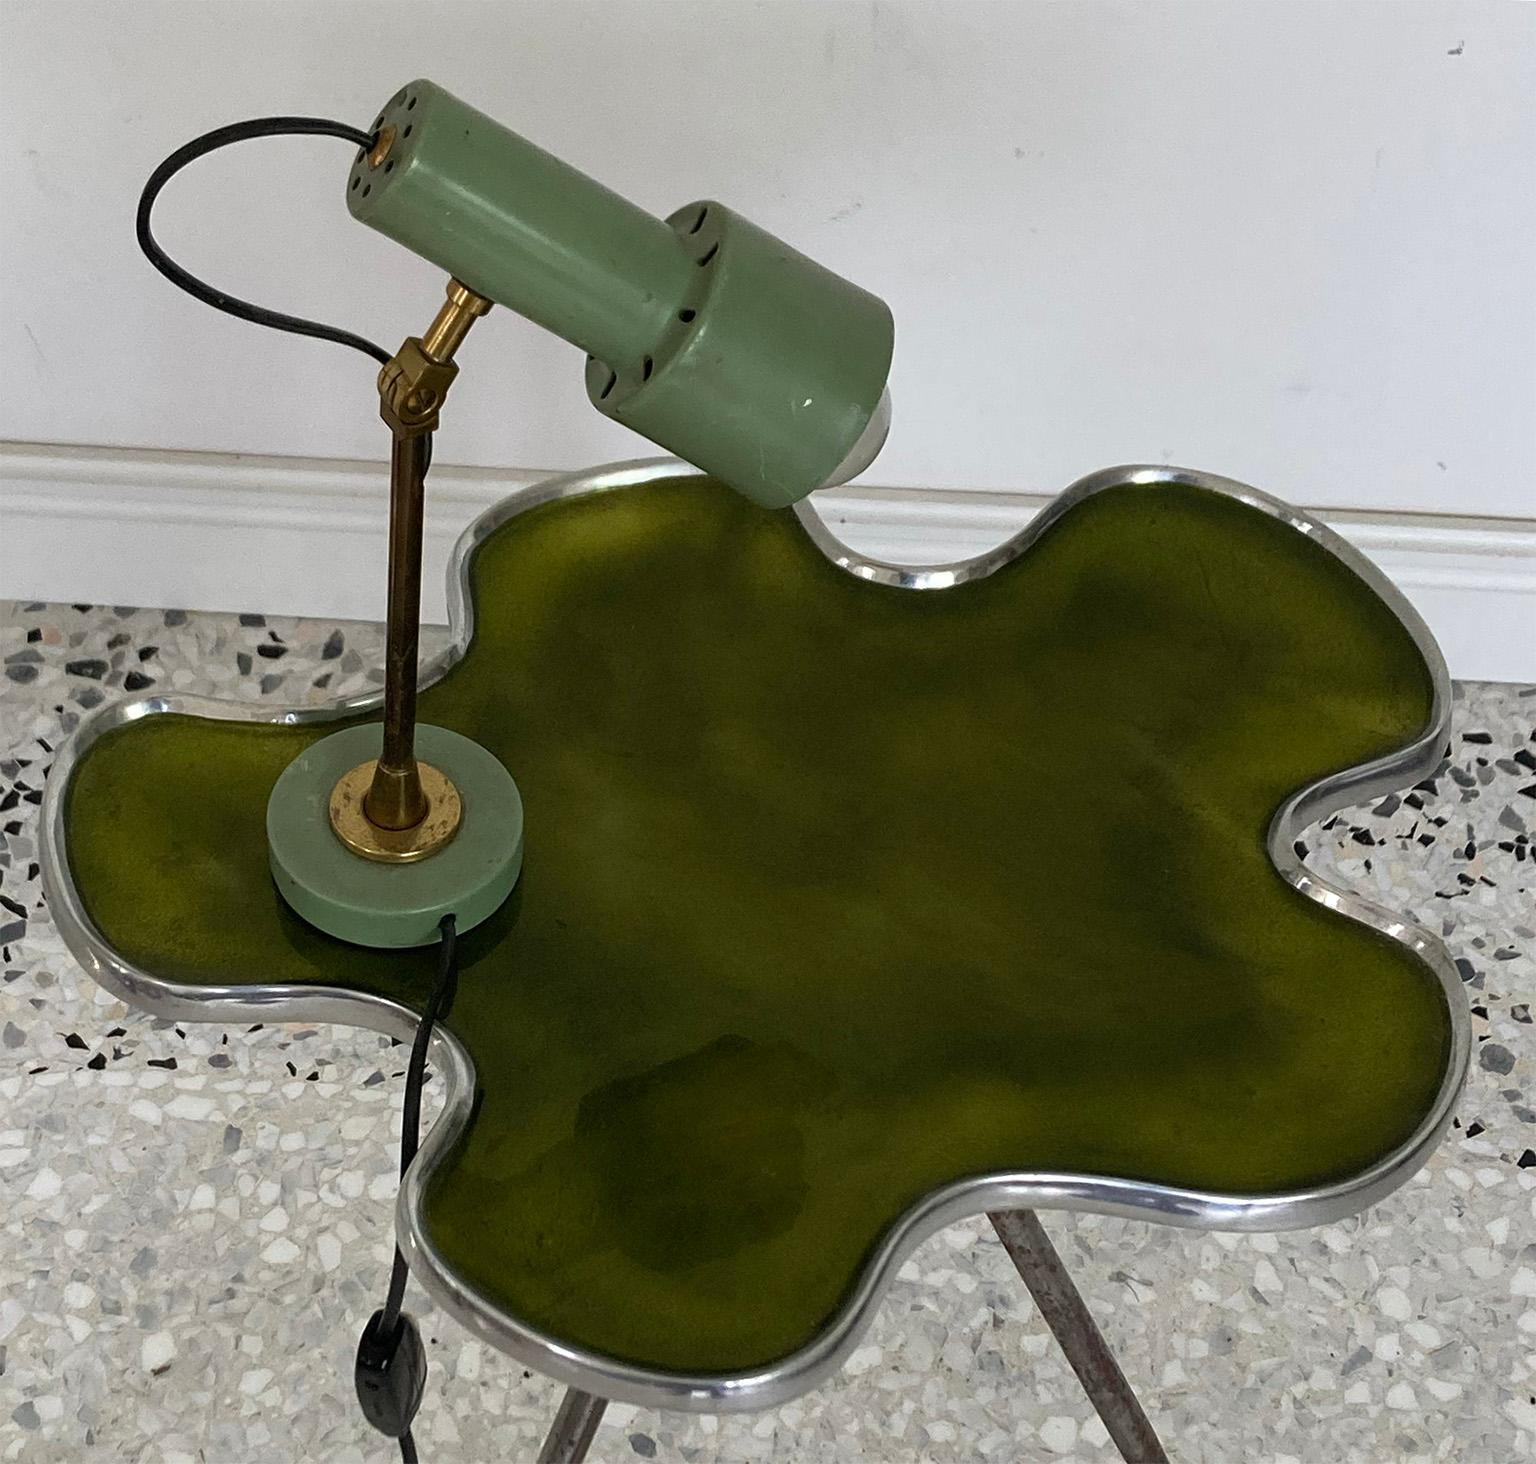 Graceful adjustable table lamp manufactured by Stilnovo in Milano during decade 1950-1960.
Thanks tonBrass joints the green reflectir can be adjusted.